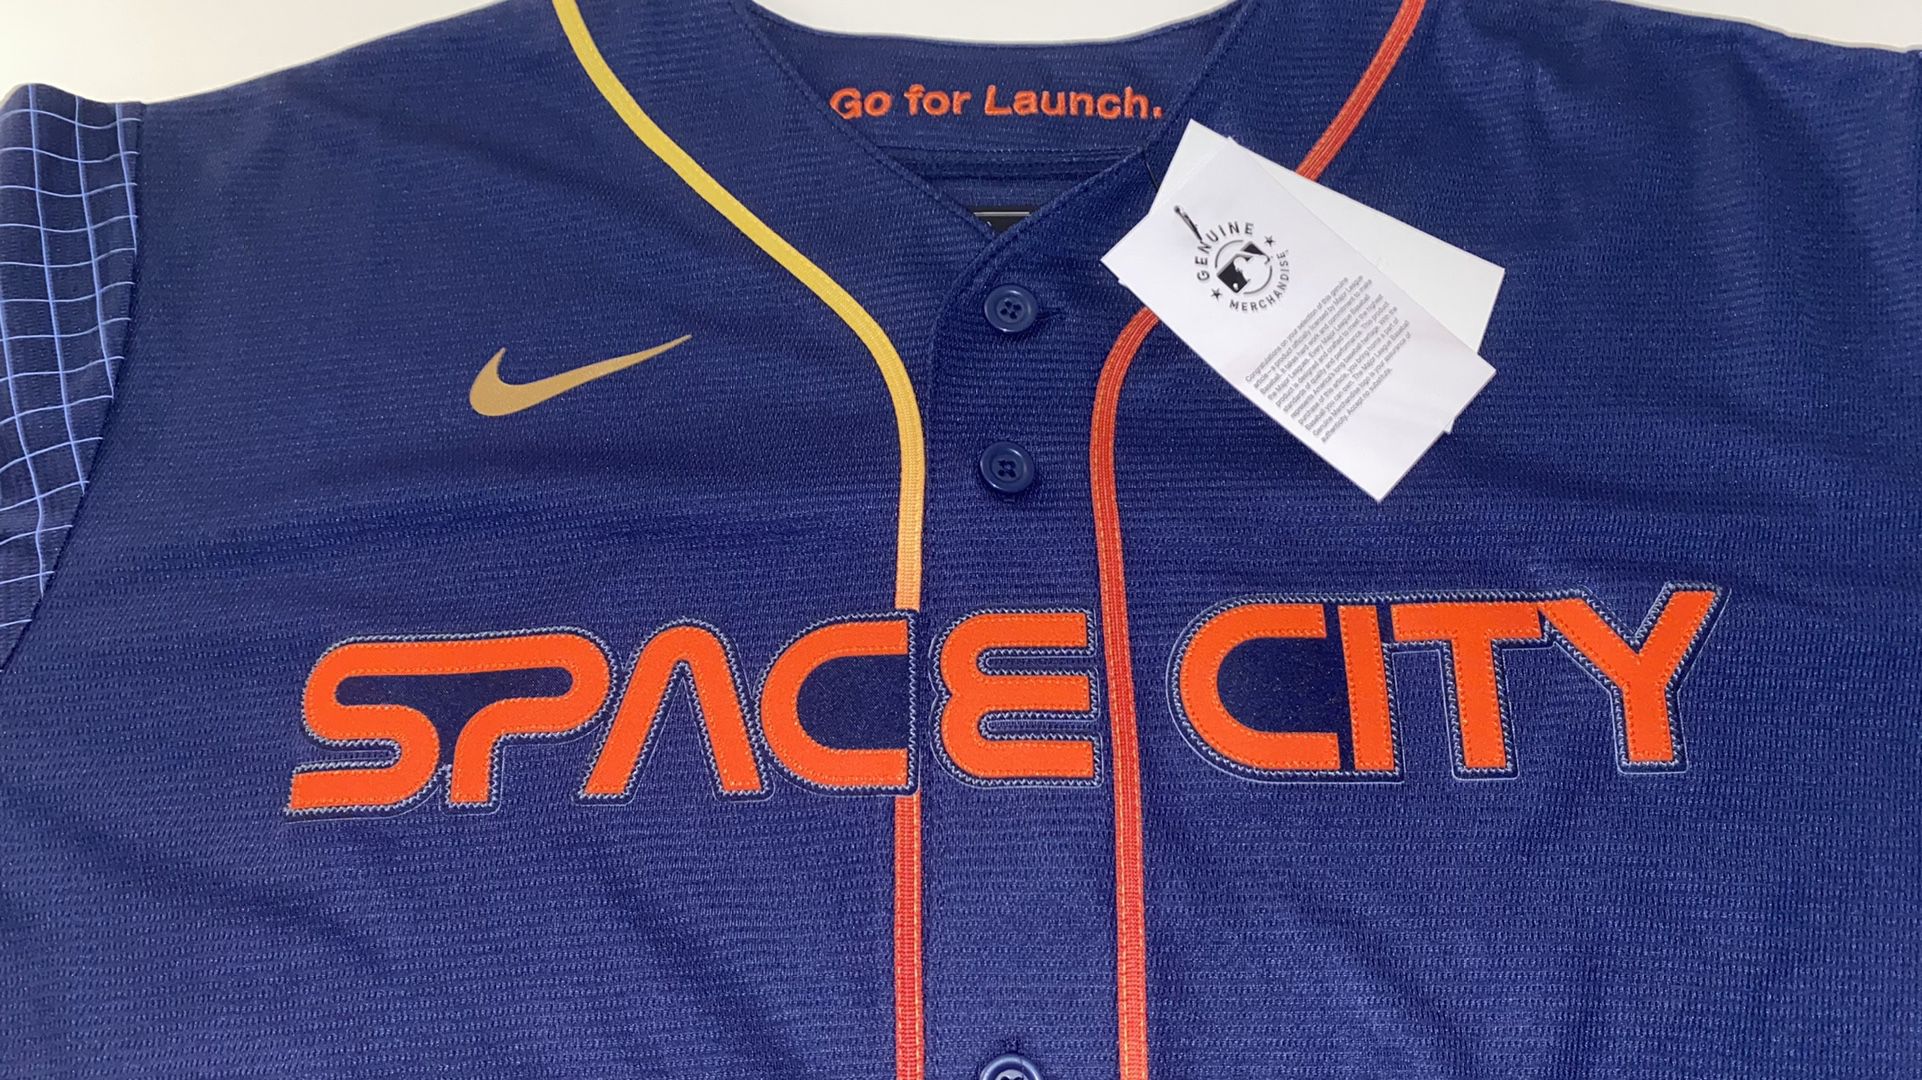 space city jersey